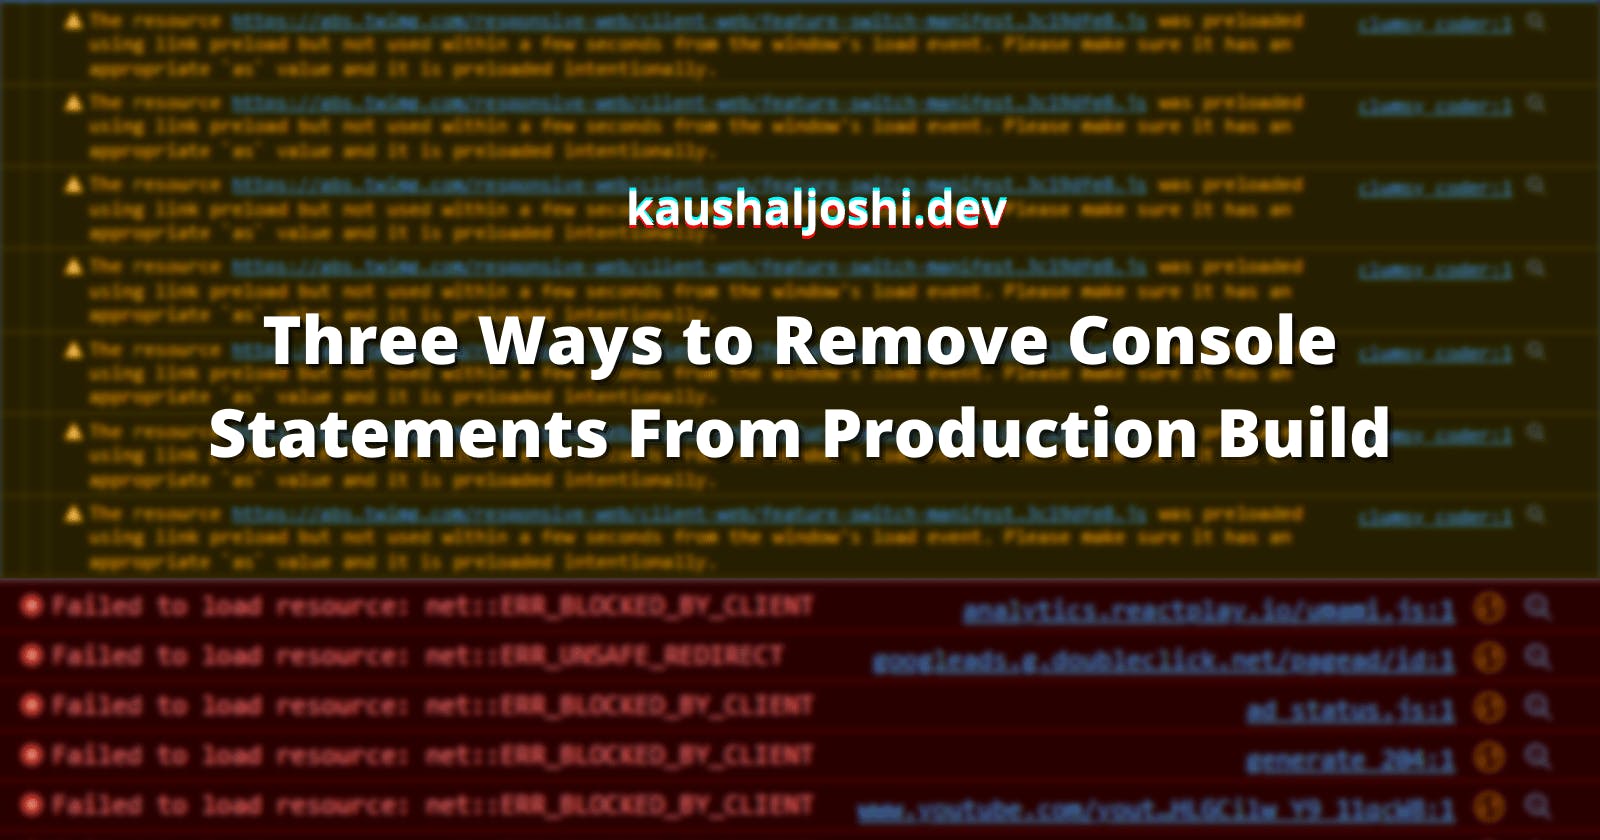 Three Ways to Remove Console Statements From Production Build